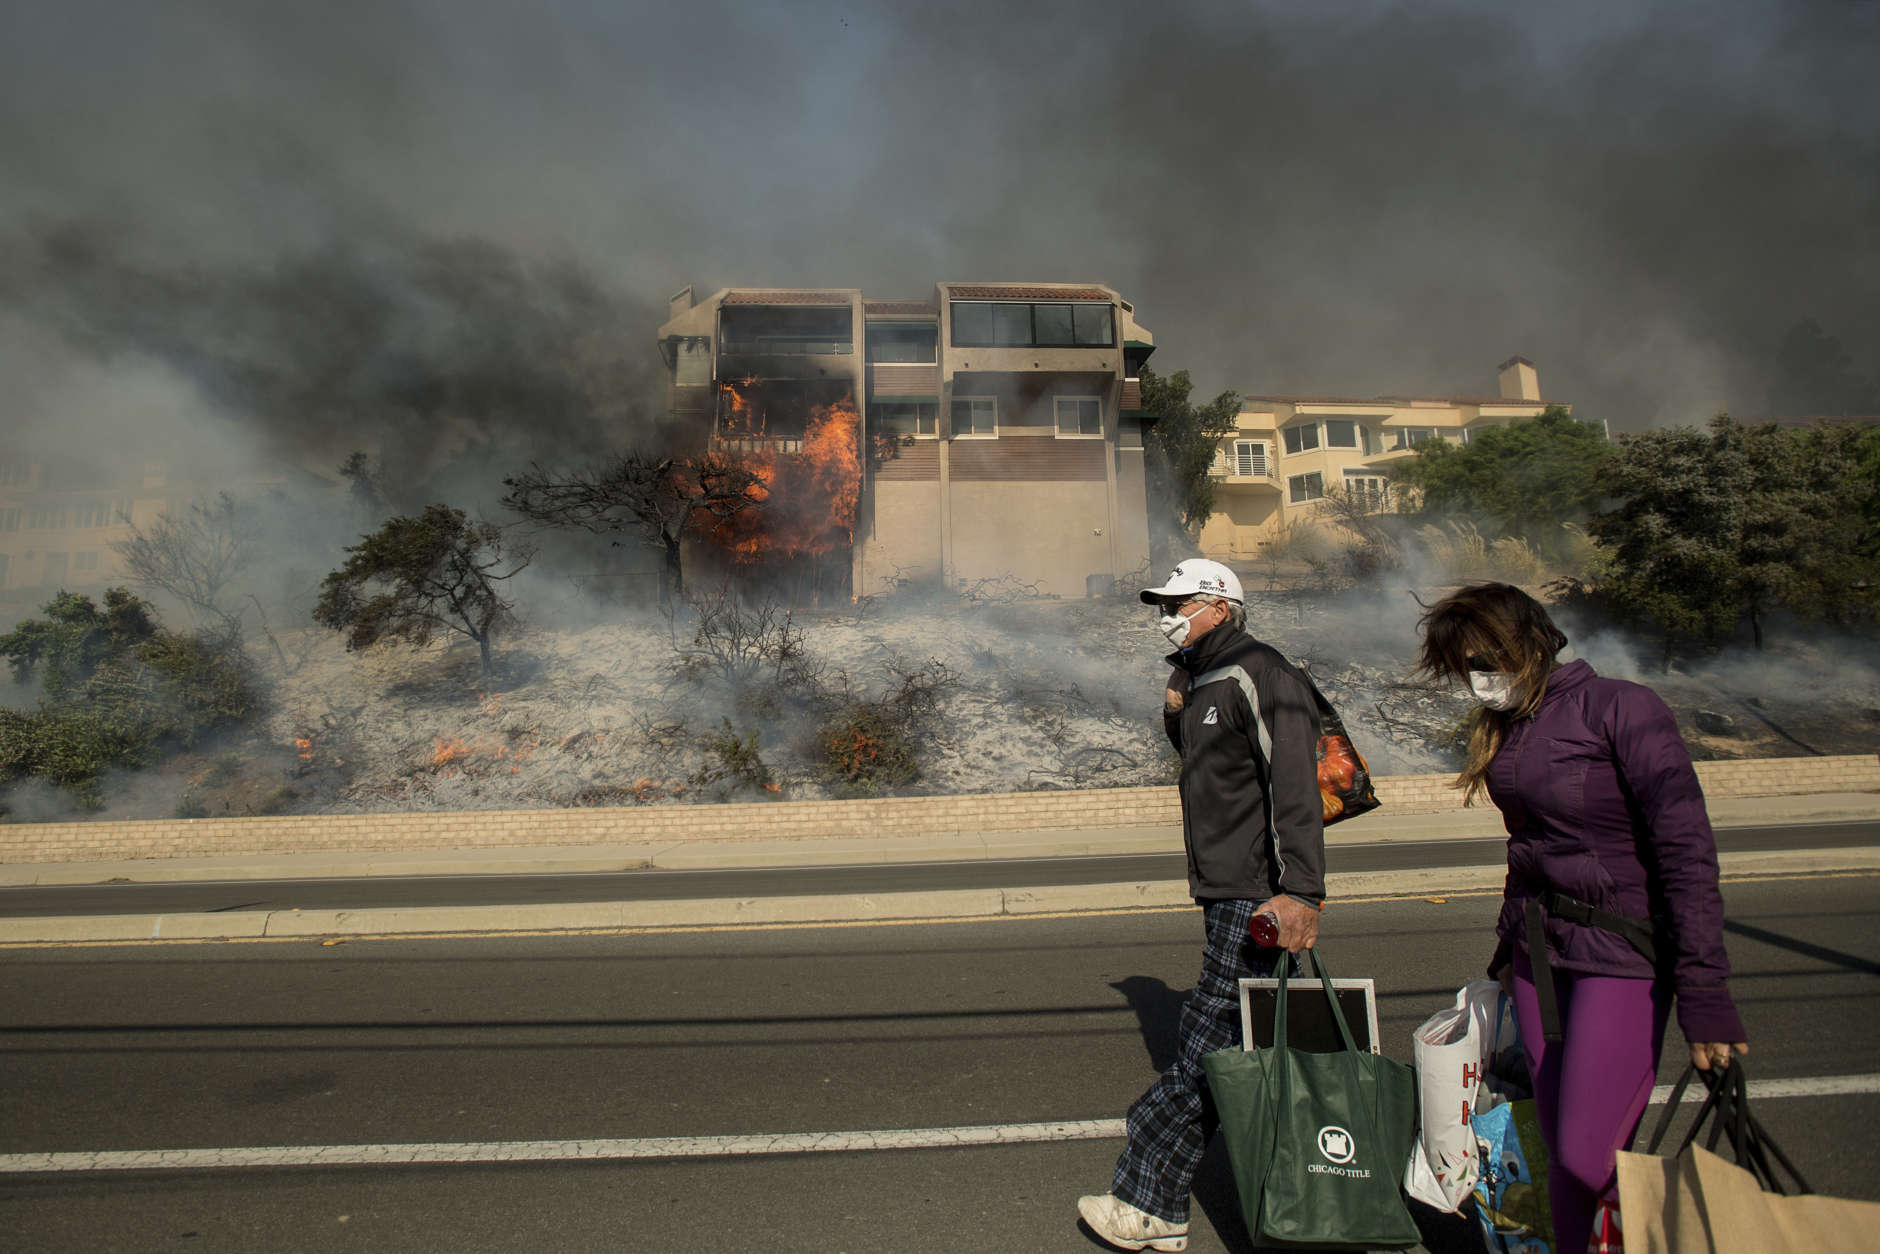 James and Josie Ralstin carry belongings from their Ventura, Calif., home as flames from a wildfire consume another residence on Tuesday, Dec. 5, 2017. The couple evacuated early Tuesday morning as the fire approached, but returned to retrieve medications and other property. (AP Photo/Noah Berger)